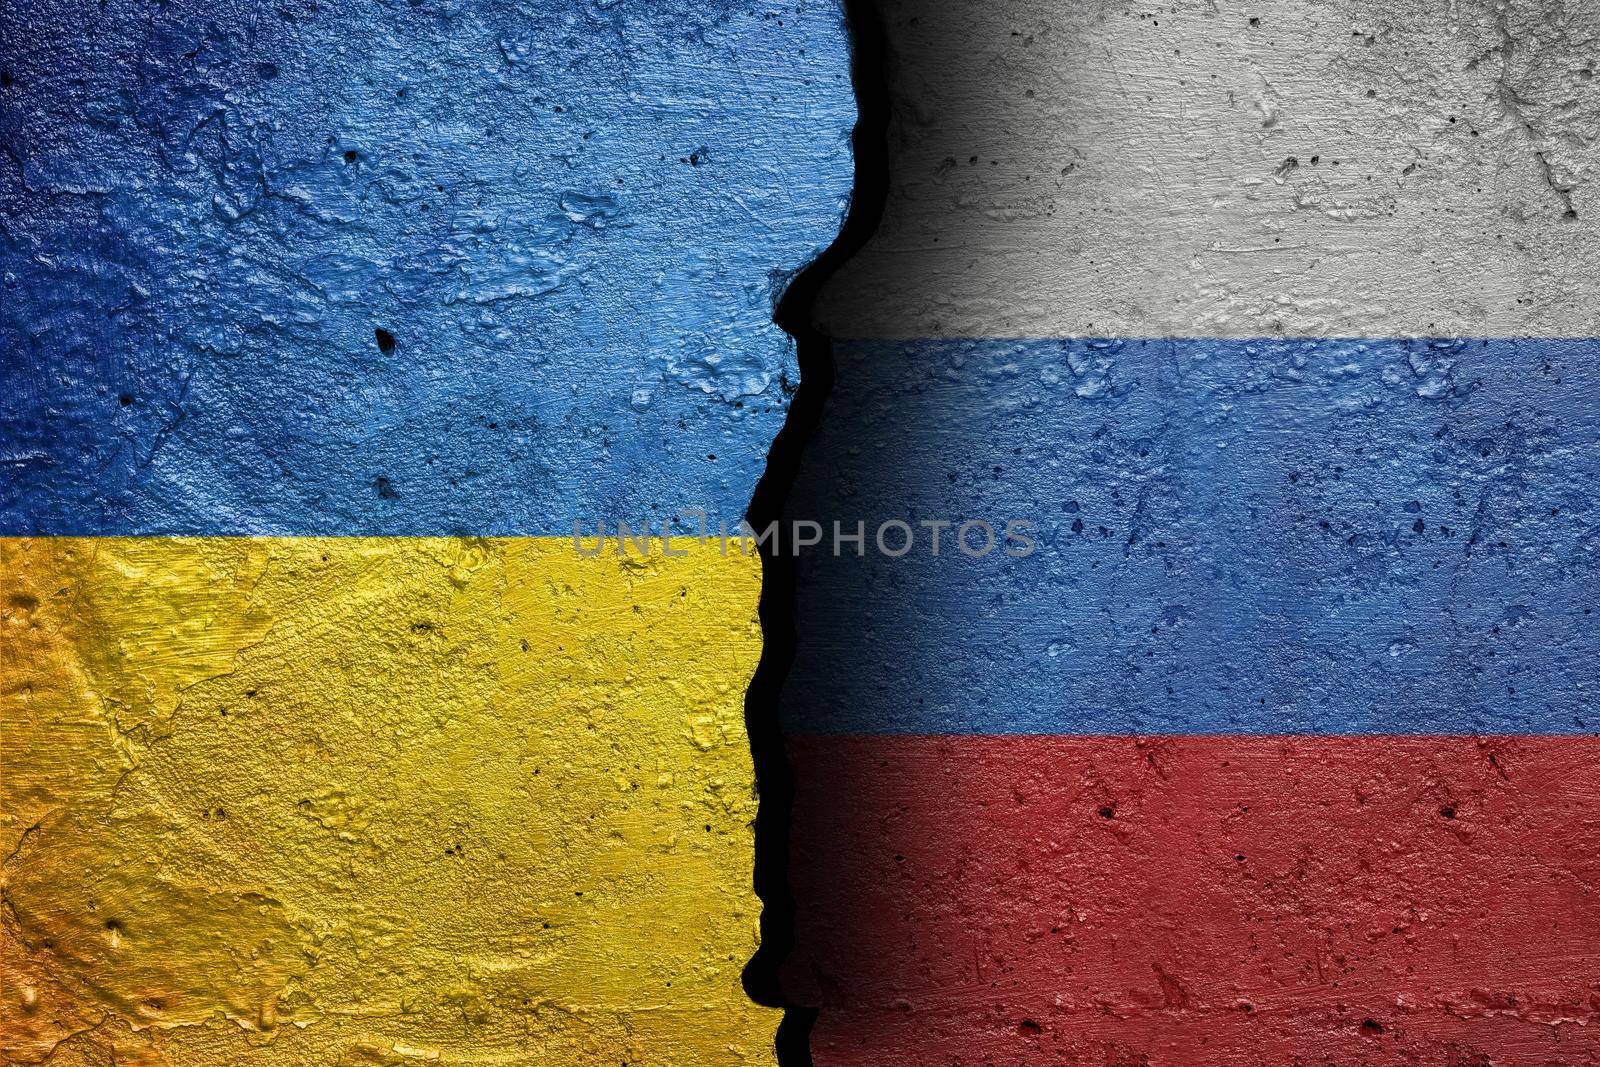 Ukraine and Russia - Cracked concrete wall painted with a Ukrainian flag on the left and a Russian flag on the right stock photo by adamr